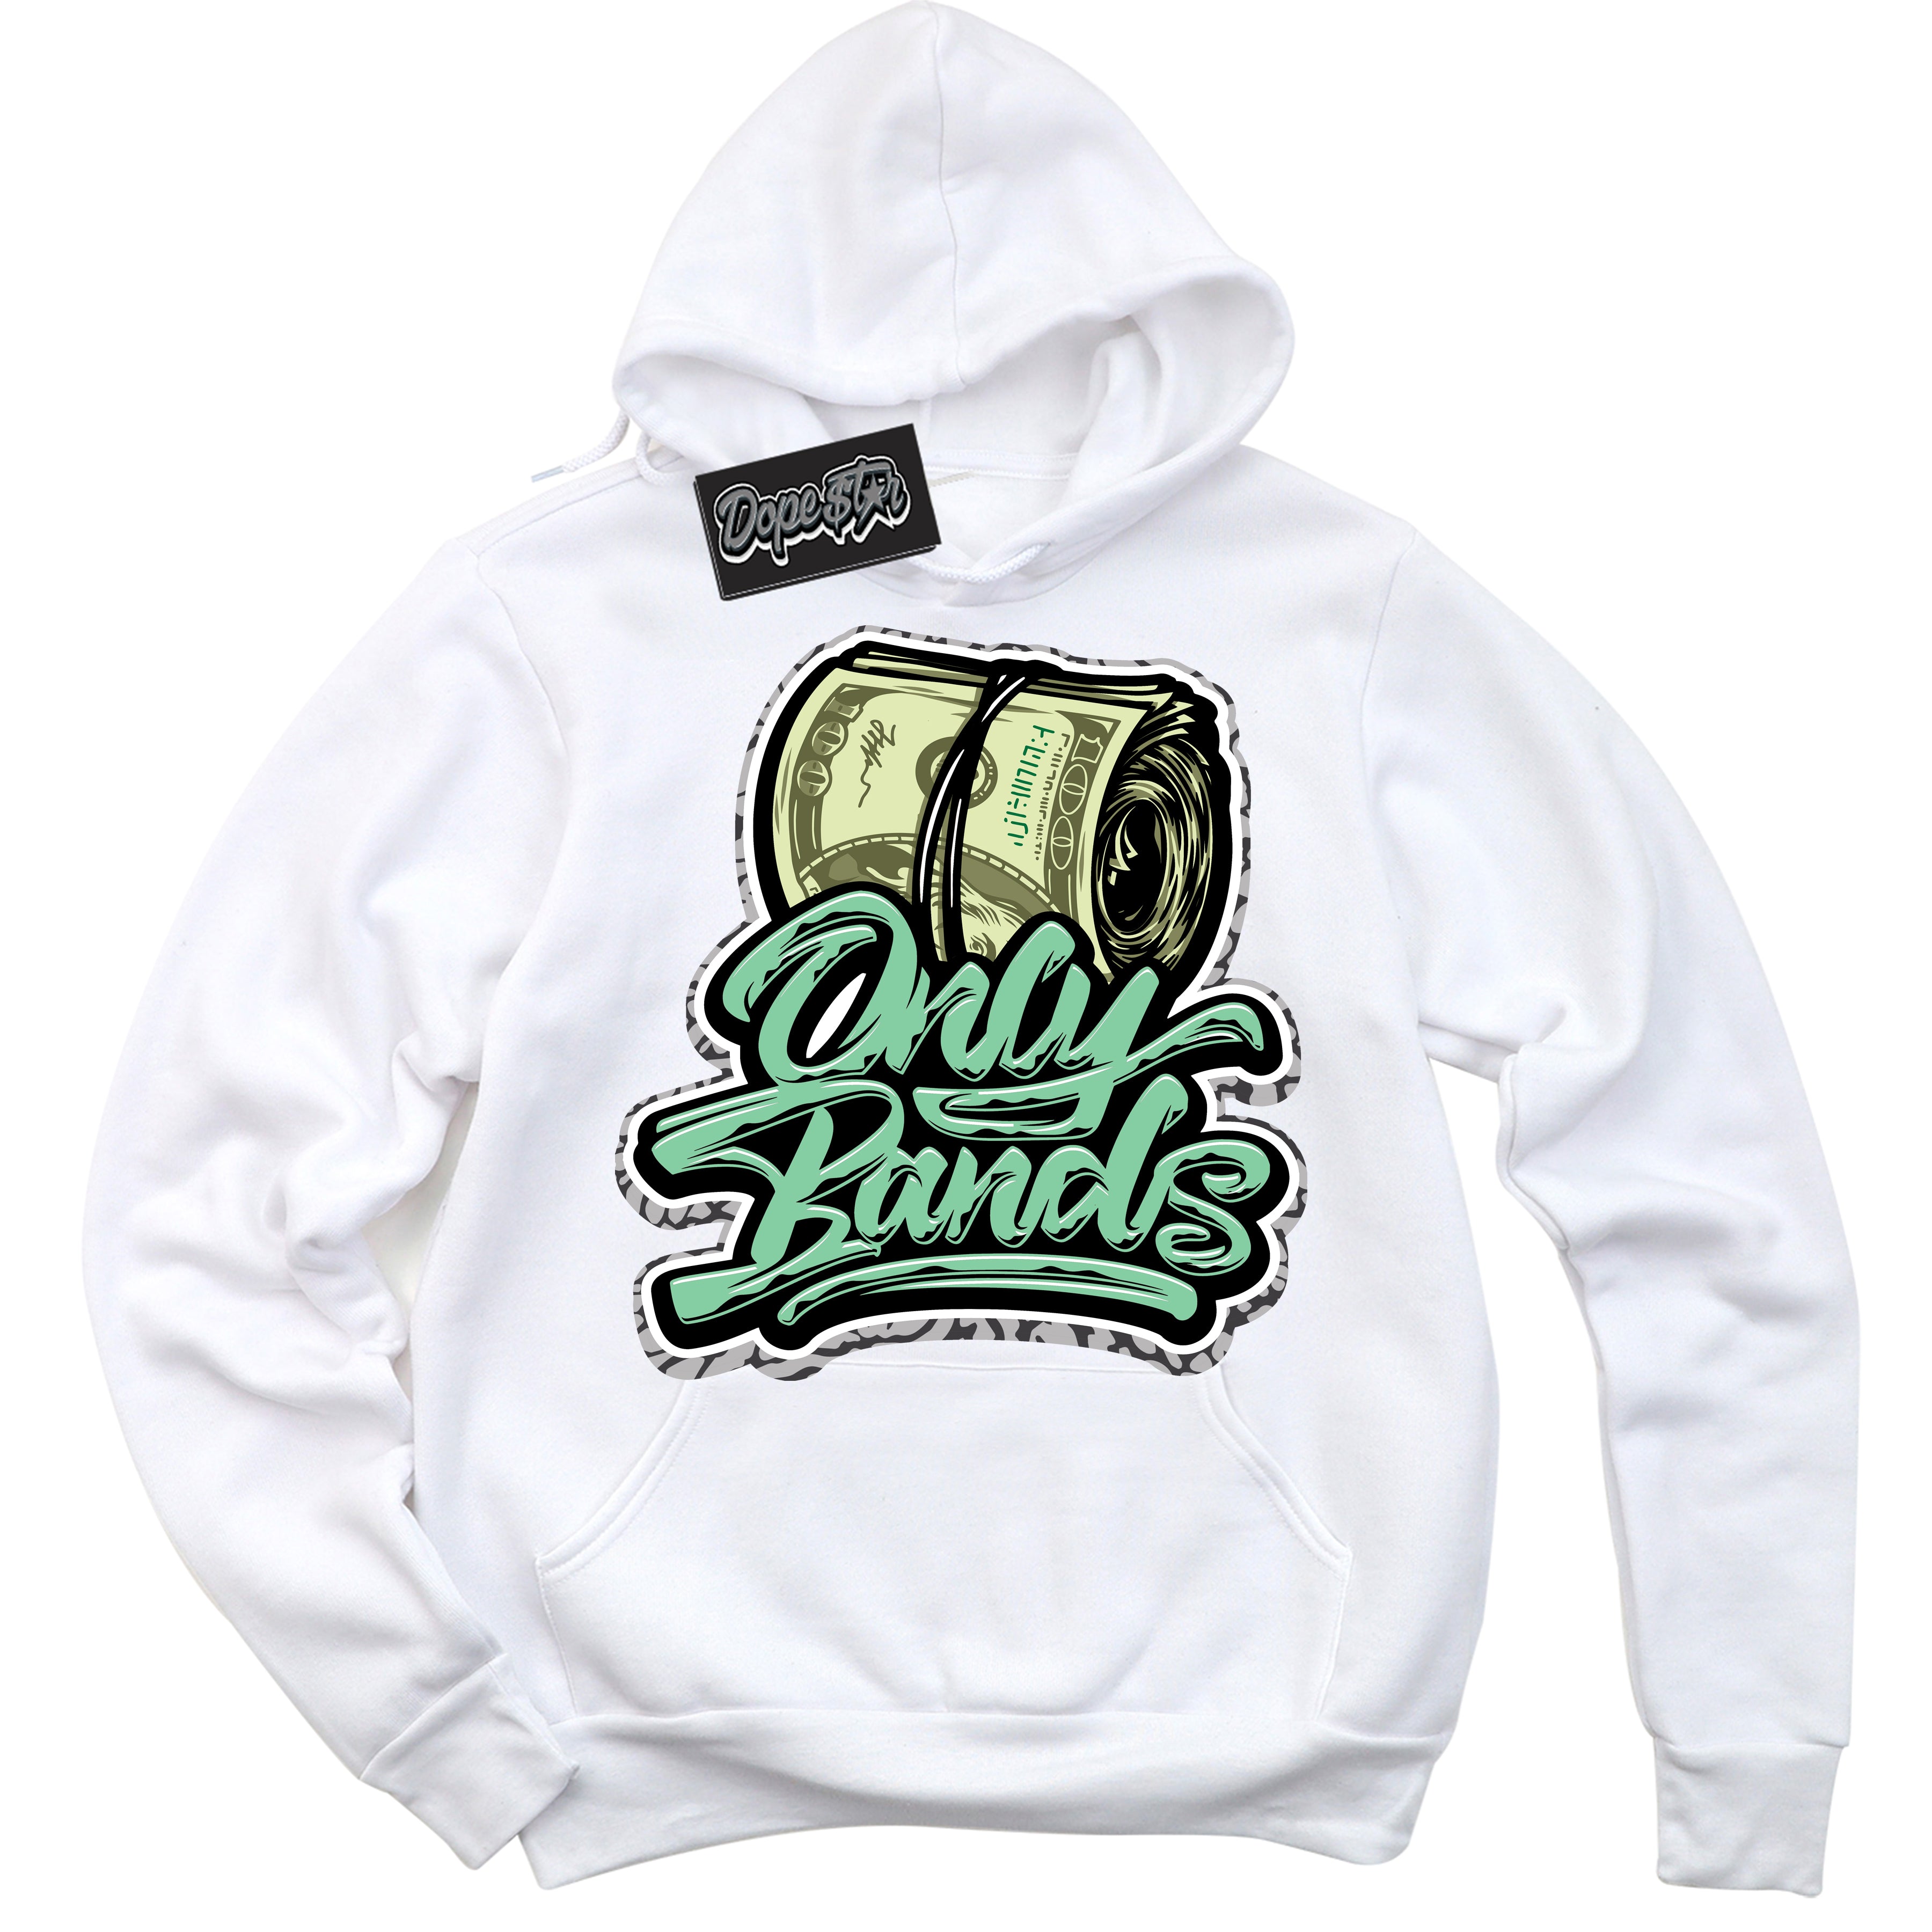 Cool White Graphic DopeStar Hoodie with “ Only Bands “ print, that perfectly matches Green Glow 3s sneakers